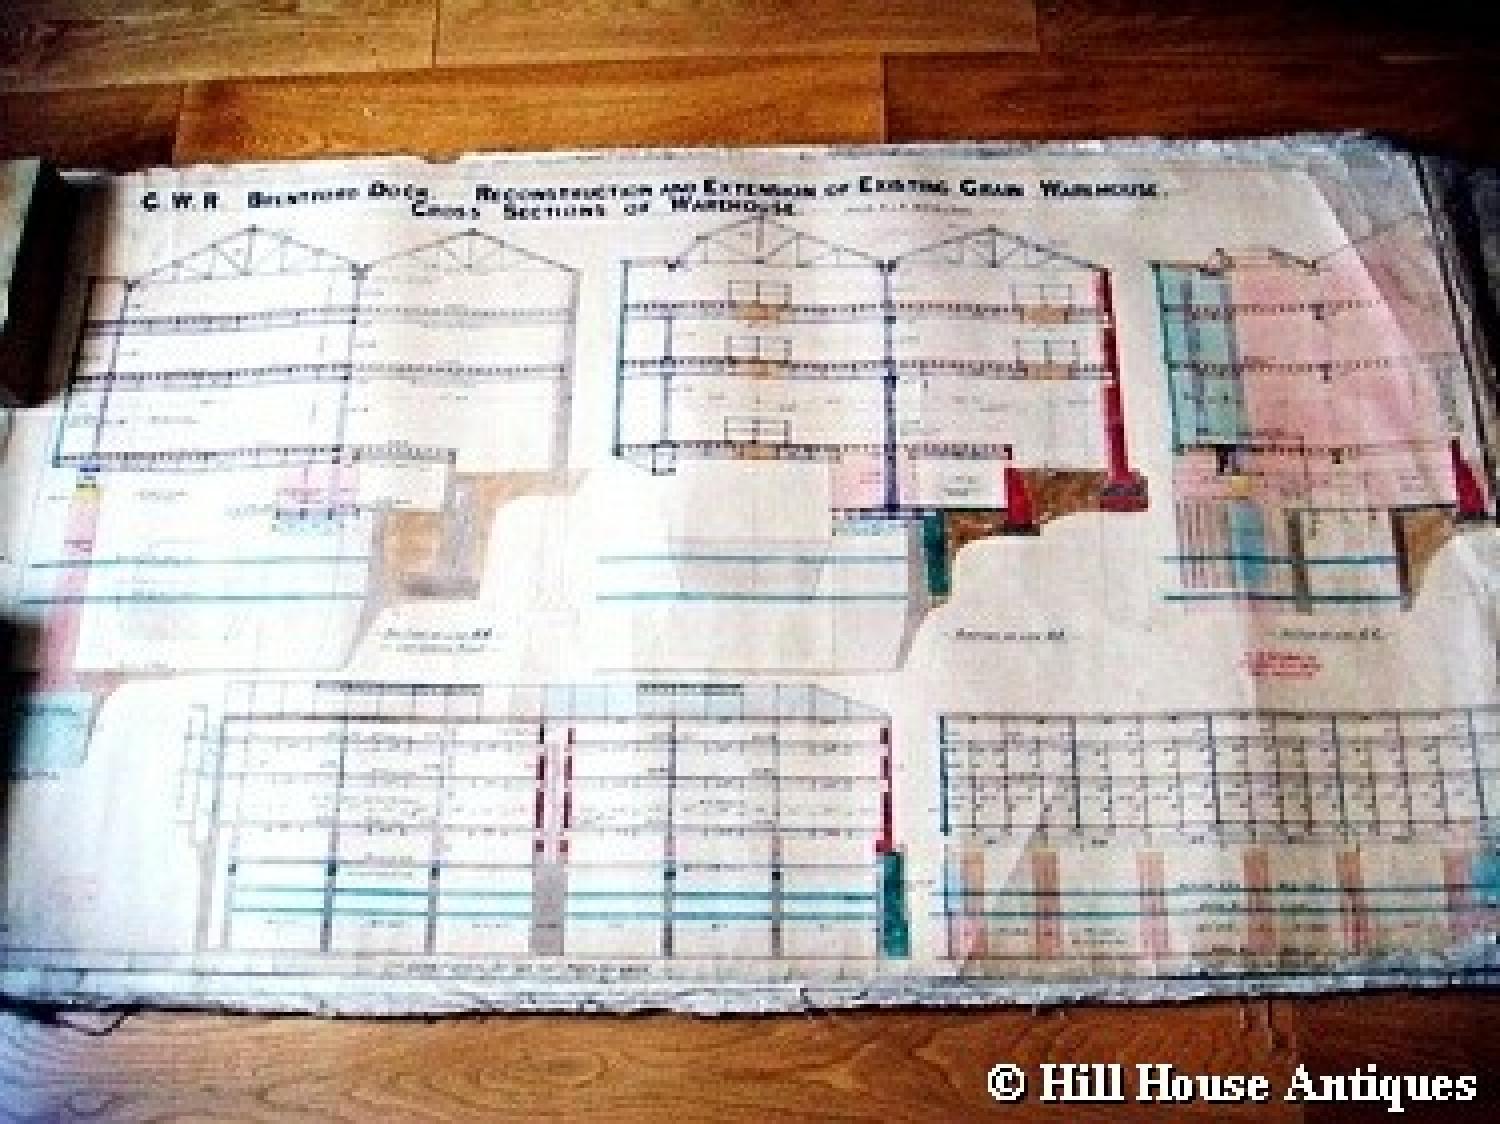 Rare set of GWR architectural drawings